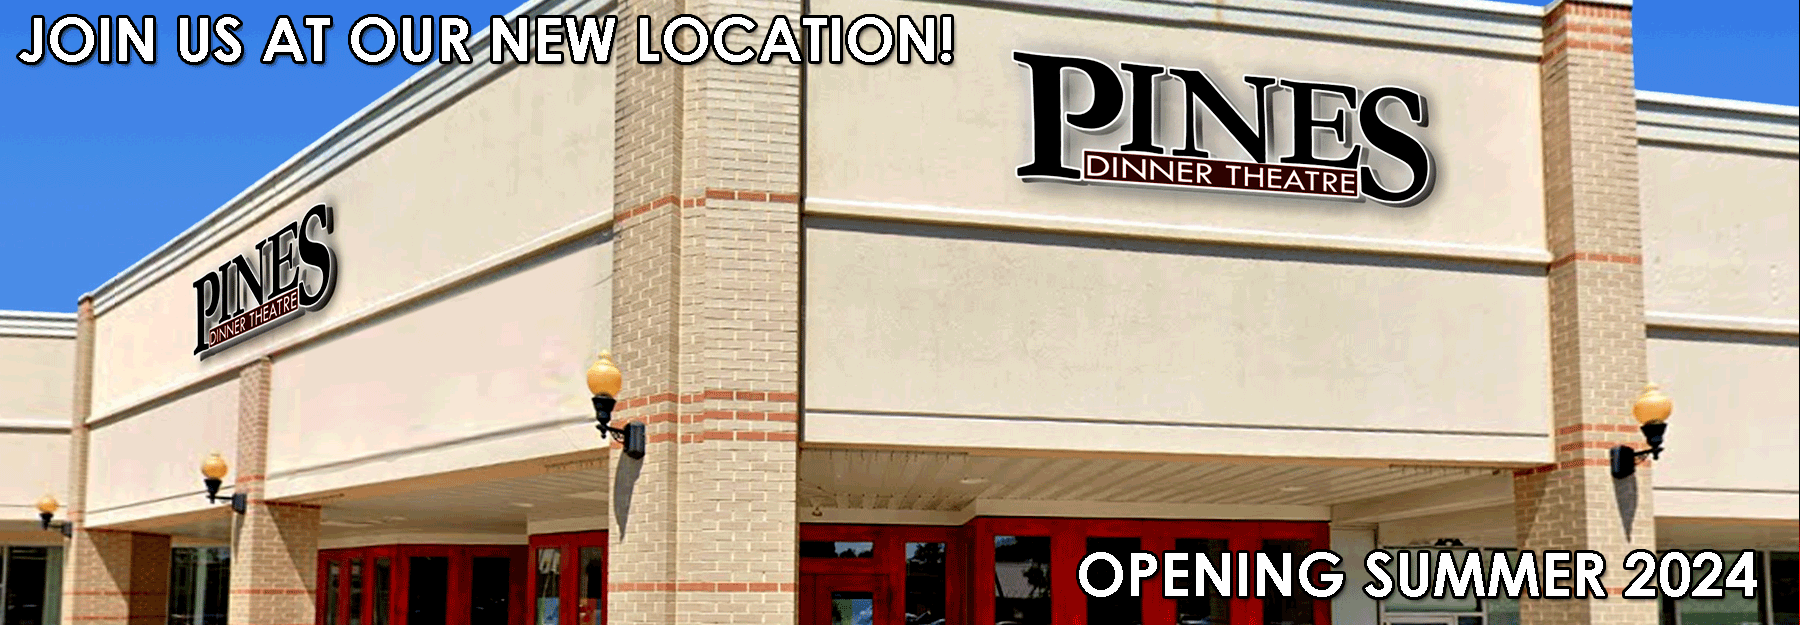 We're moving the Pines Dinner Theatre. Find out more here!